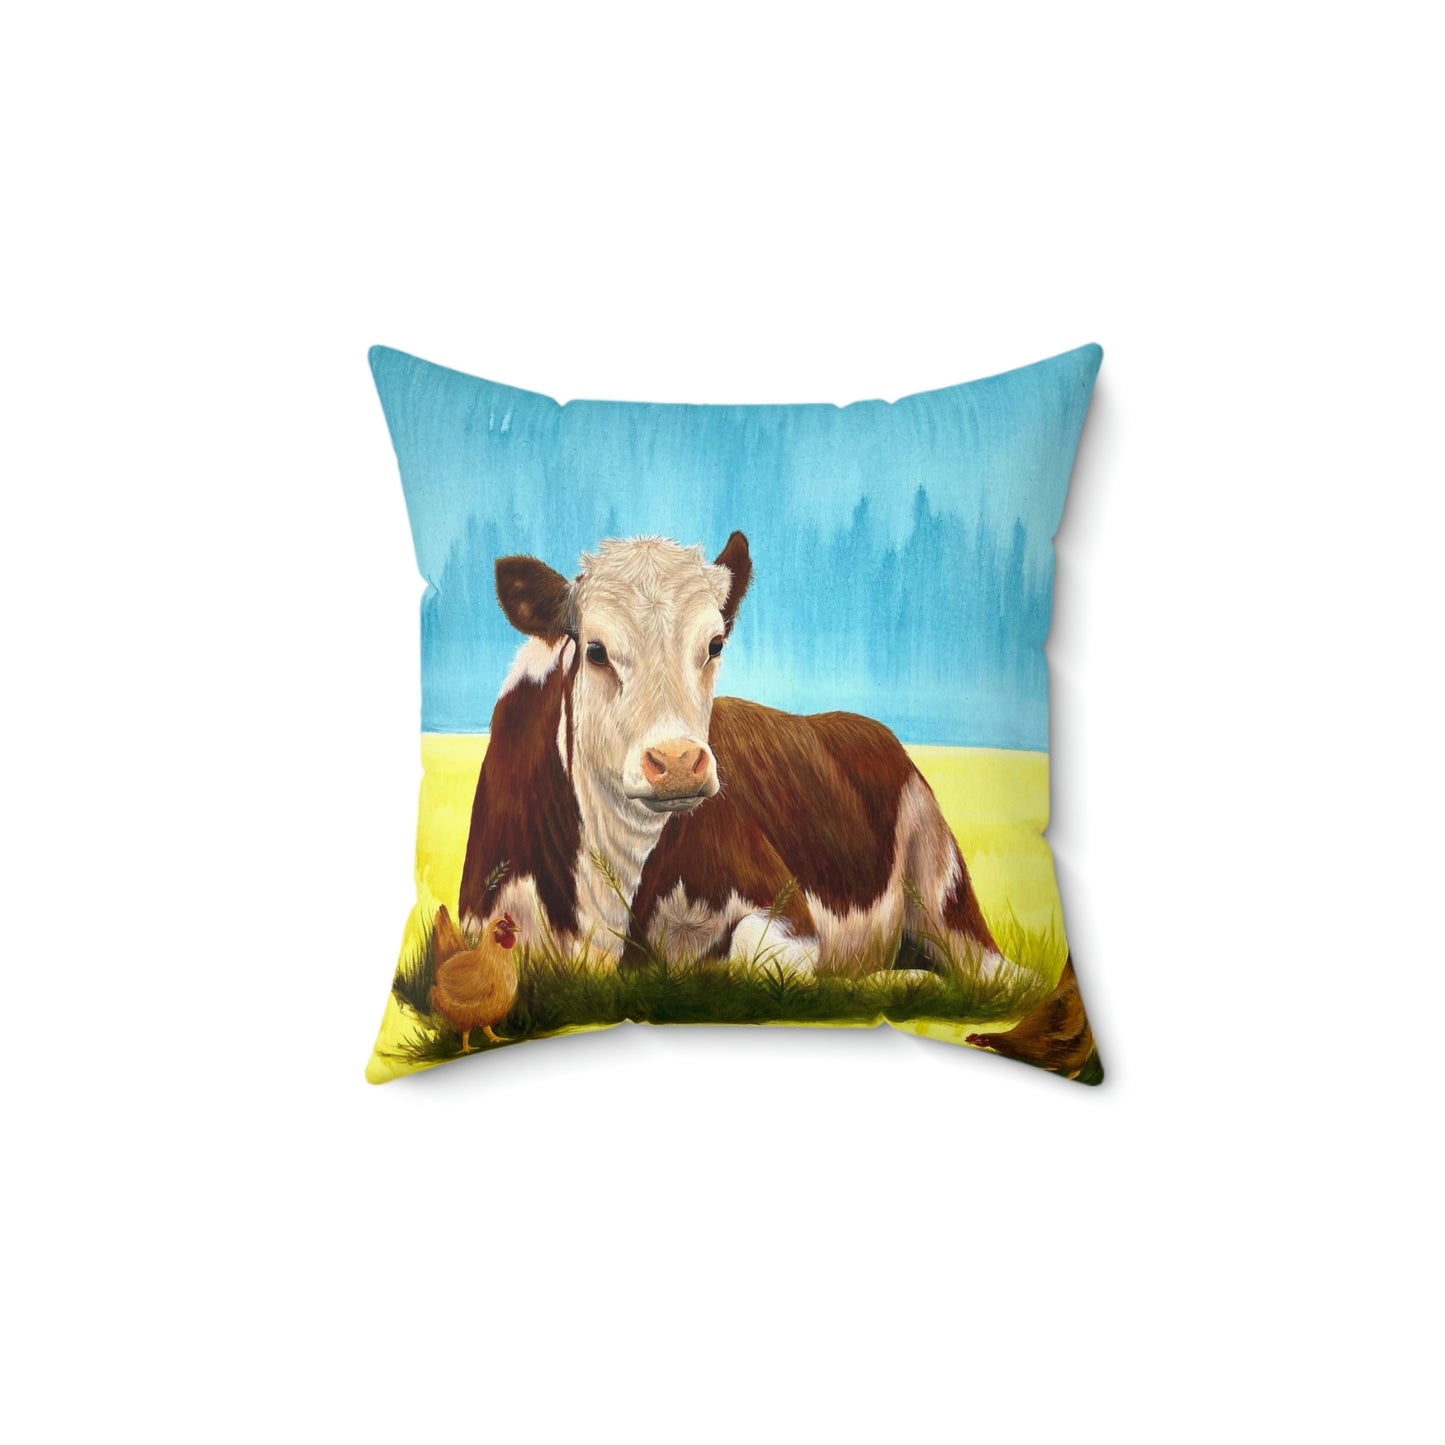 Hereford Cow Pillow